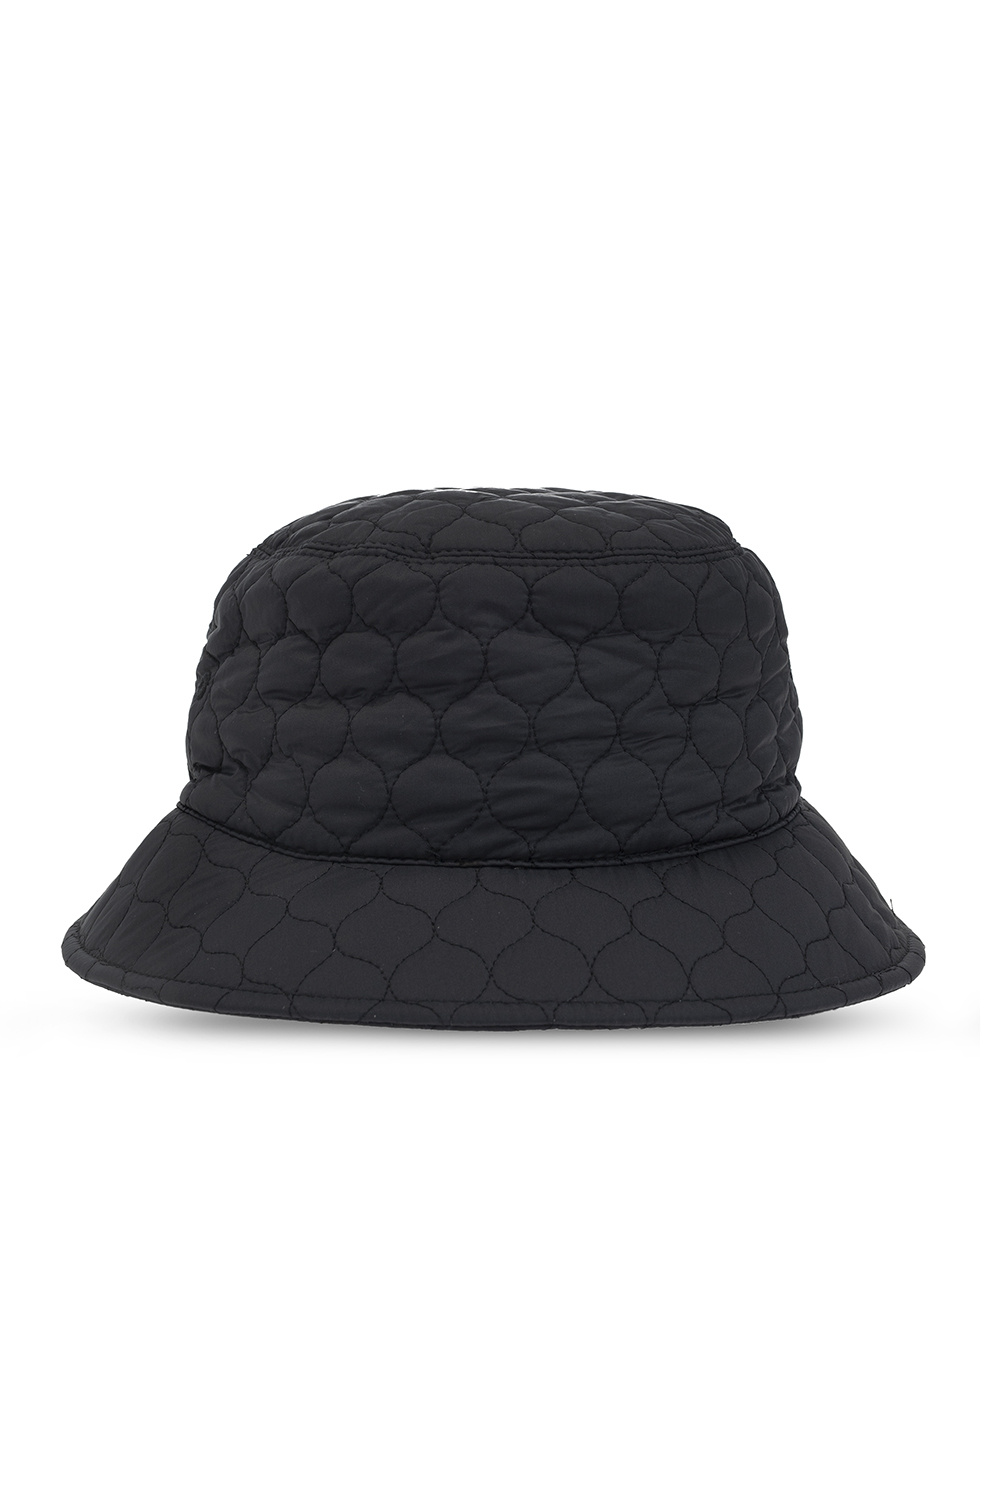 Emporio Armani ‘Sustainable’ collection bucket silk-ribboned hat